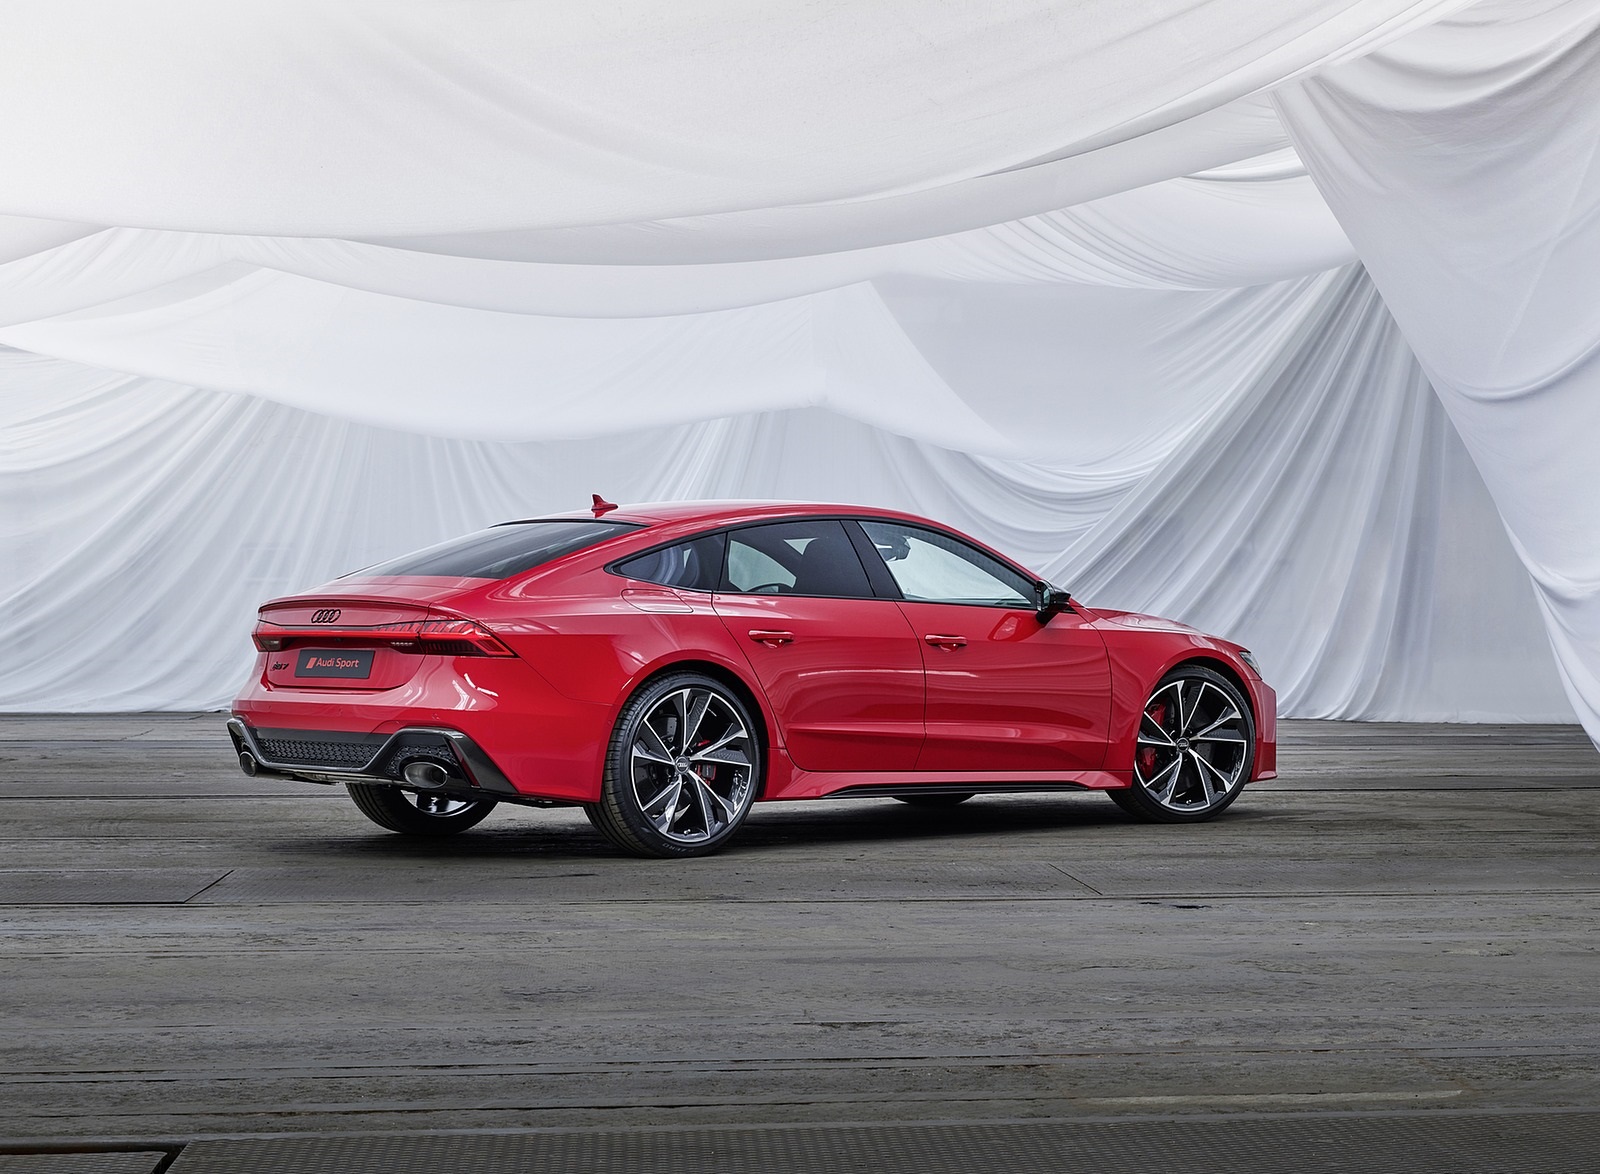 2020 Audi RS 7 Sportback (Color: Tango Red) Rear Three-Quarter Wallpapers #50 of 99